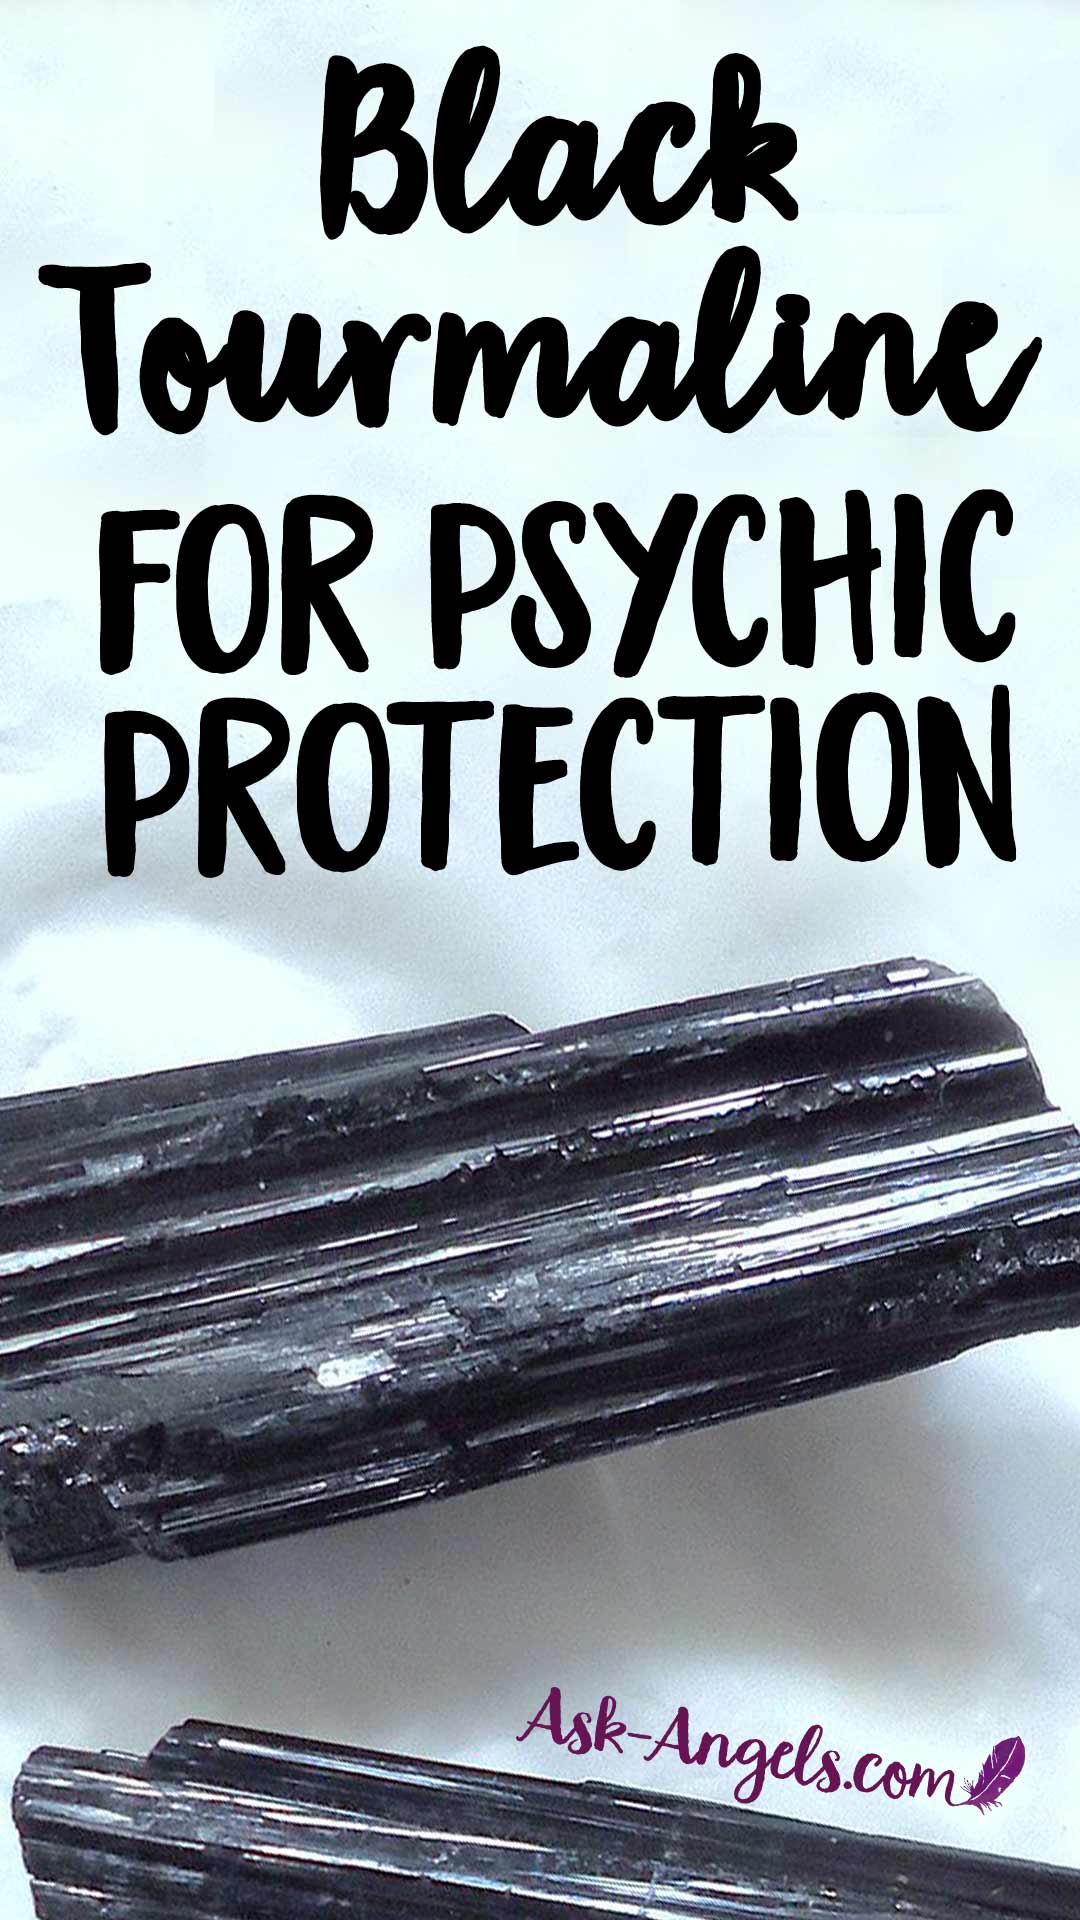 Learn how to use a Black Tourmaline crystal for powerful psychic protection.